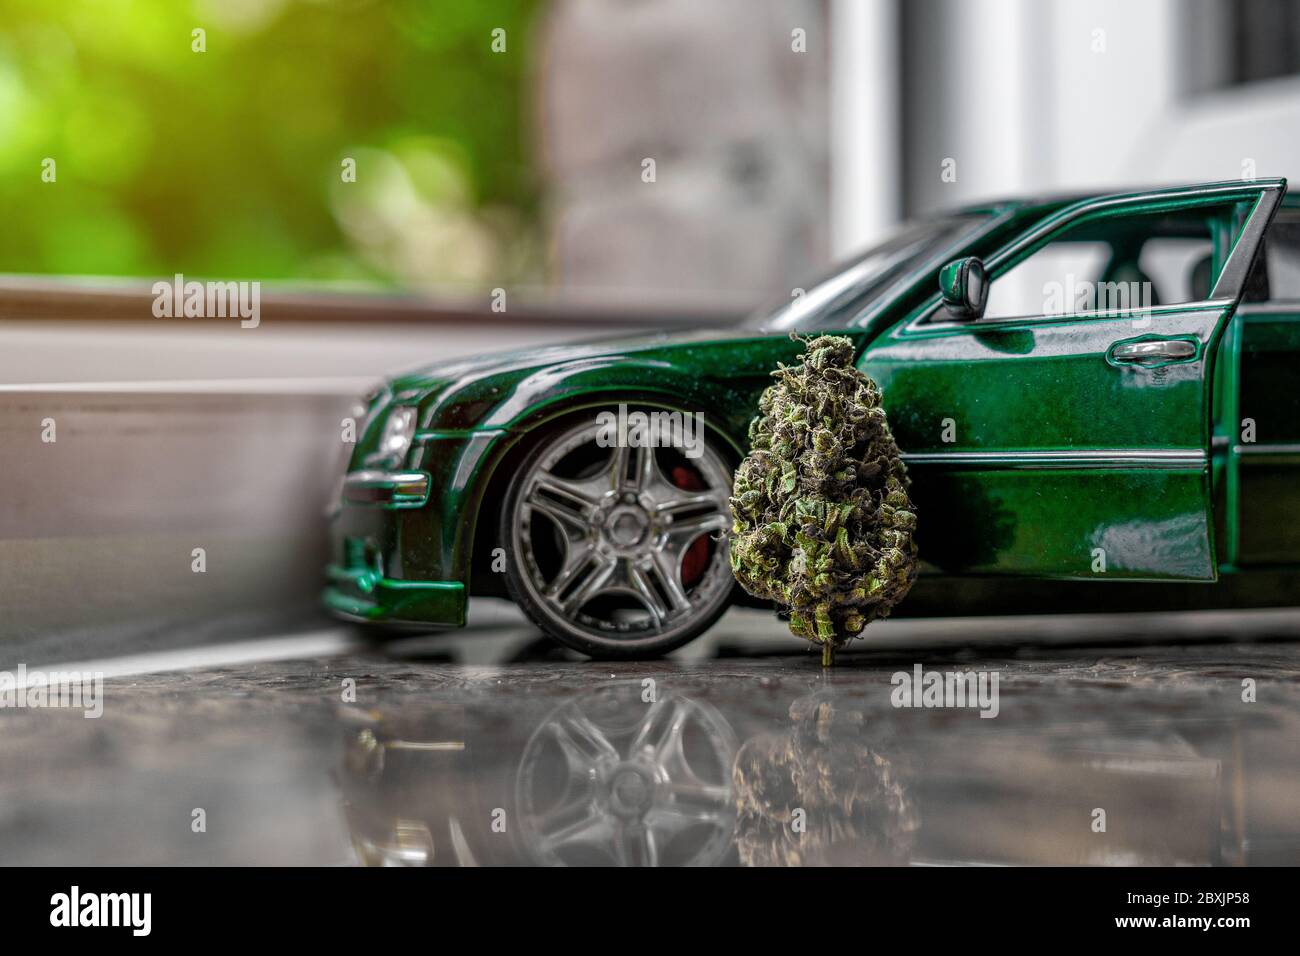 Dry marijuana bud in trichomes, rich in cannabinoids. Detailed cannabis girl scout cookies and a small car model. Creative shot Stock Photo